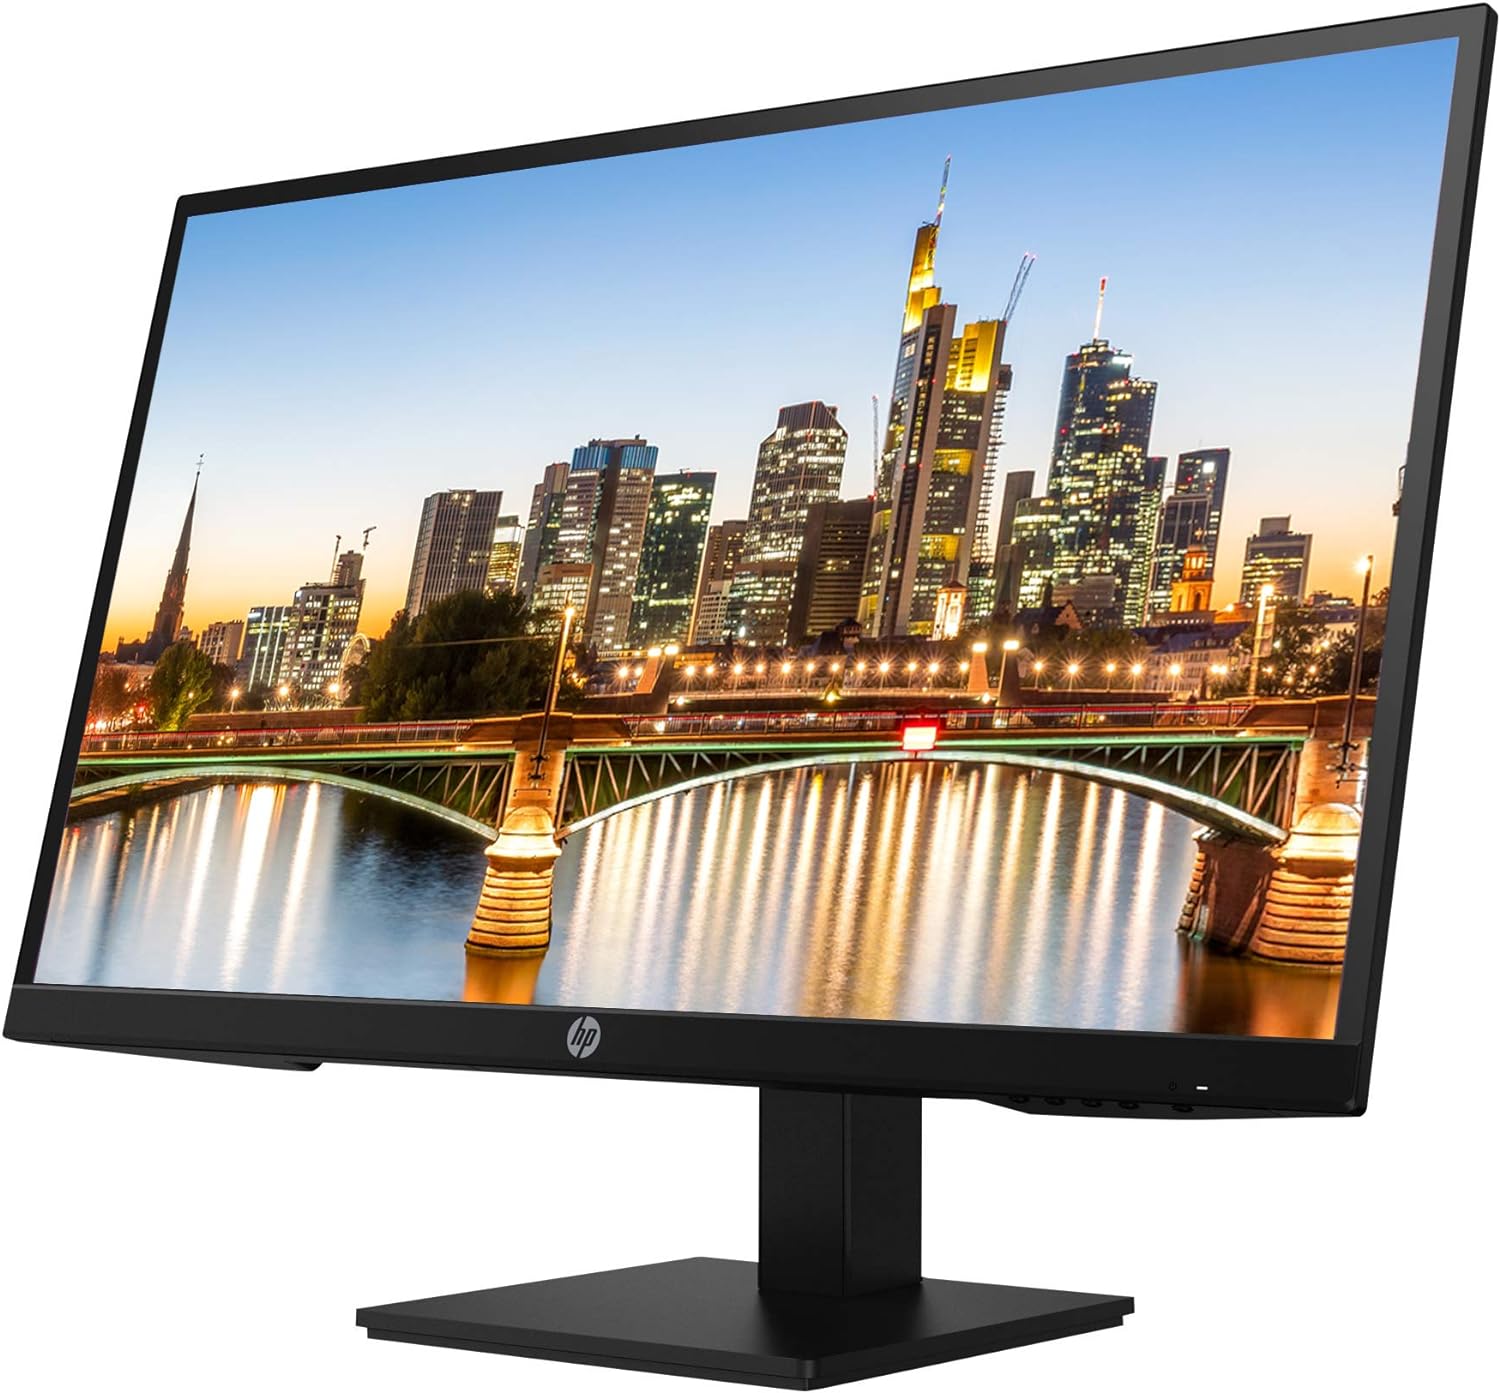 HP P27h G4 27 Inch FHD IPS LED-Backlit LCD 2-Pack Monitor Bundle with HDMI, Integrated Speakers, Blue Light Filter, Dual Monitor Stand, MK270 Wireless Keyboard and Mouse, Gel Pad